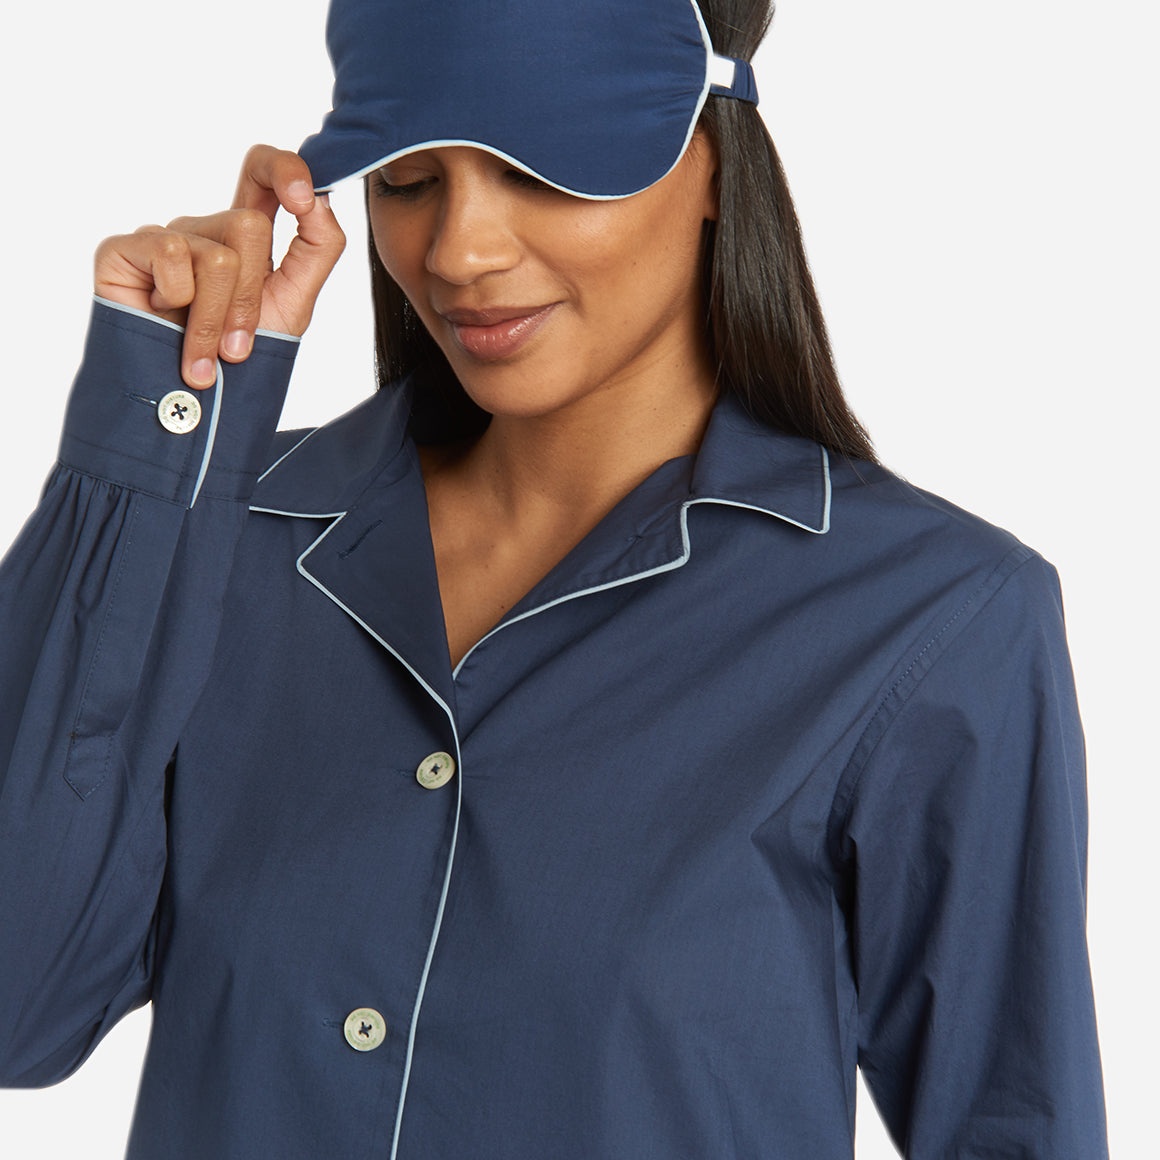 The pajama set includes a classic button-up top with a collar, two patch pockets, and functional button cuffs. The matching pair of pants features a comfortable elastic waistband, drawstring, and side-seam pockets. This cozy pj set is a timeless and stylish look that is perfect for lounging at home.